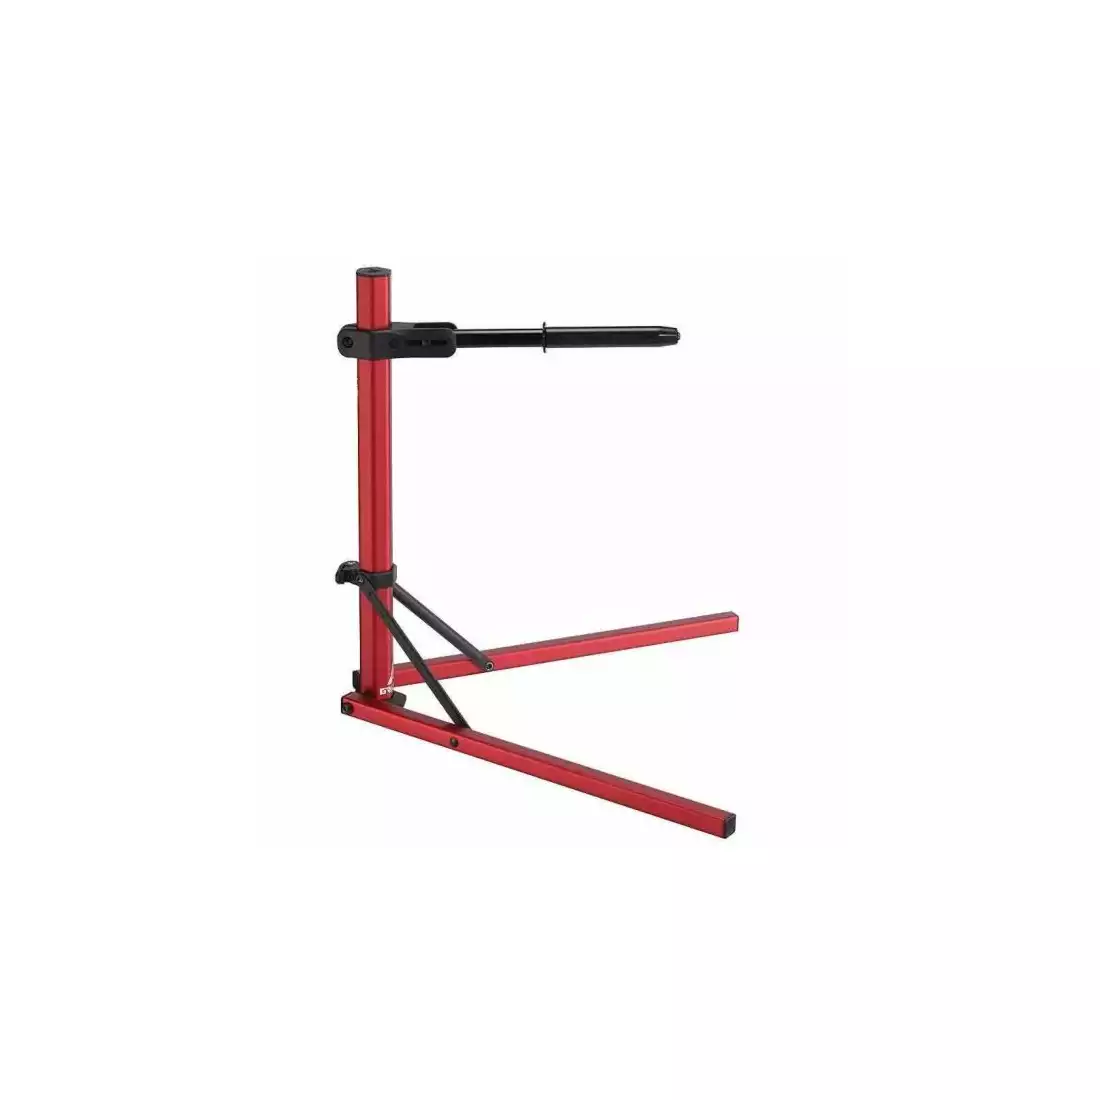 GRANITE HEX bicycle stand, red